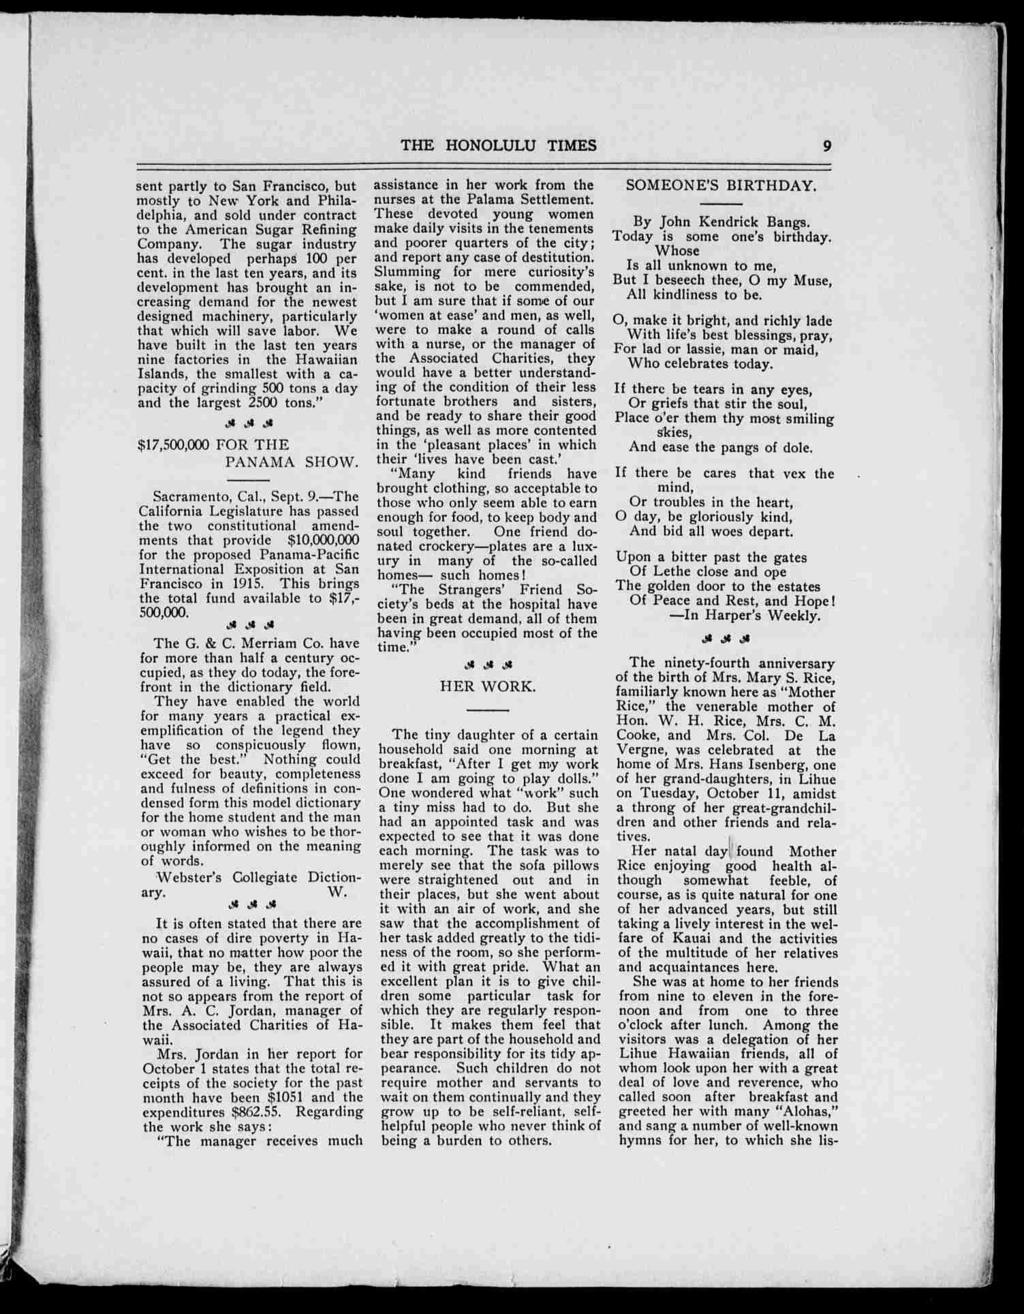 THE HONOLULU TIMES HI. sent partly to San Francsco, but mostly to New York and Phladelpha, and sold under contract to the Amercan Sugar Refnng Company.